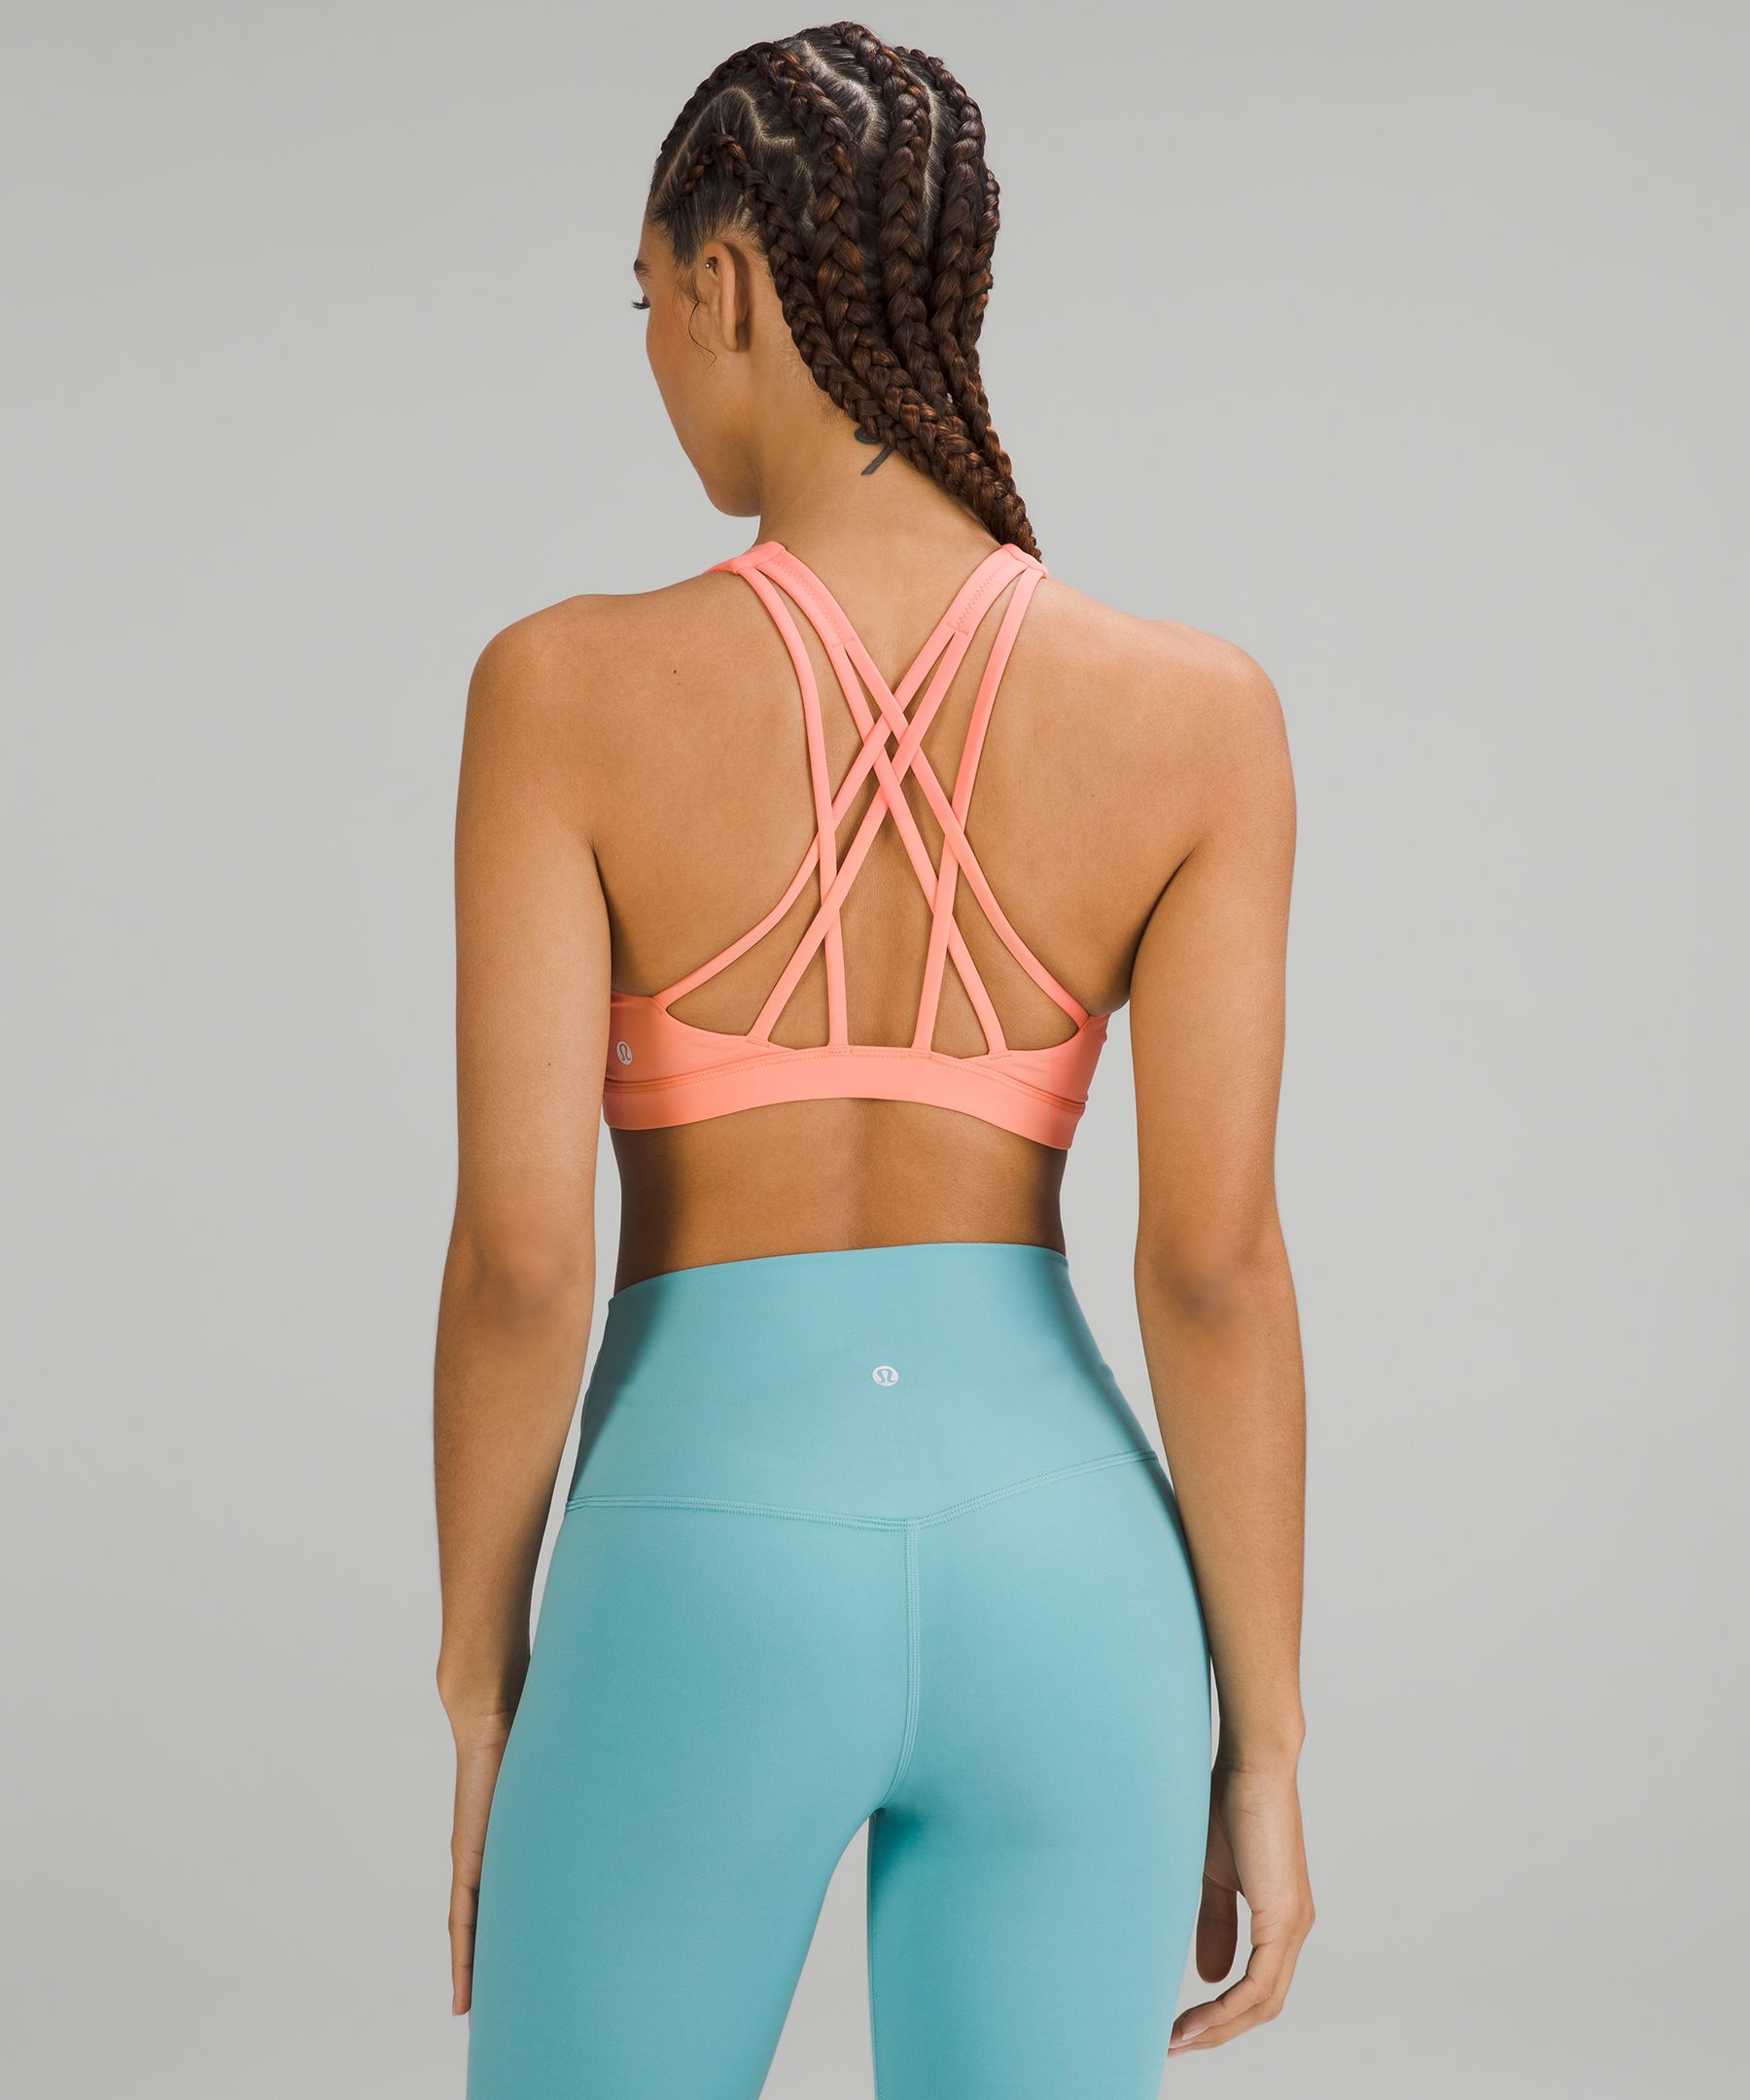 Lululemon Time To Sweat Bra Size 4 Black - $30 (42% Off Retail) - From  Melissa